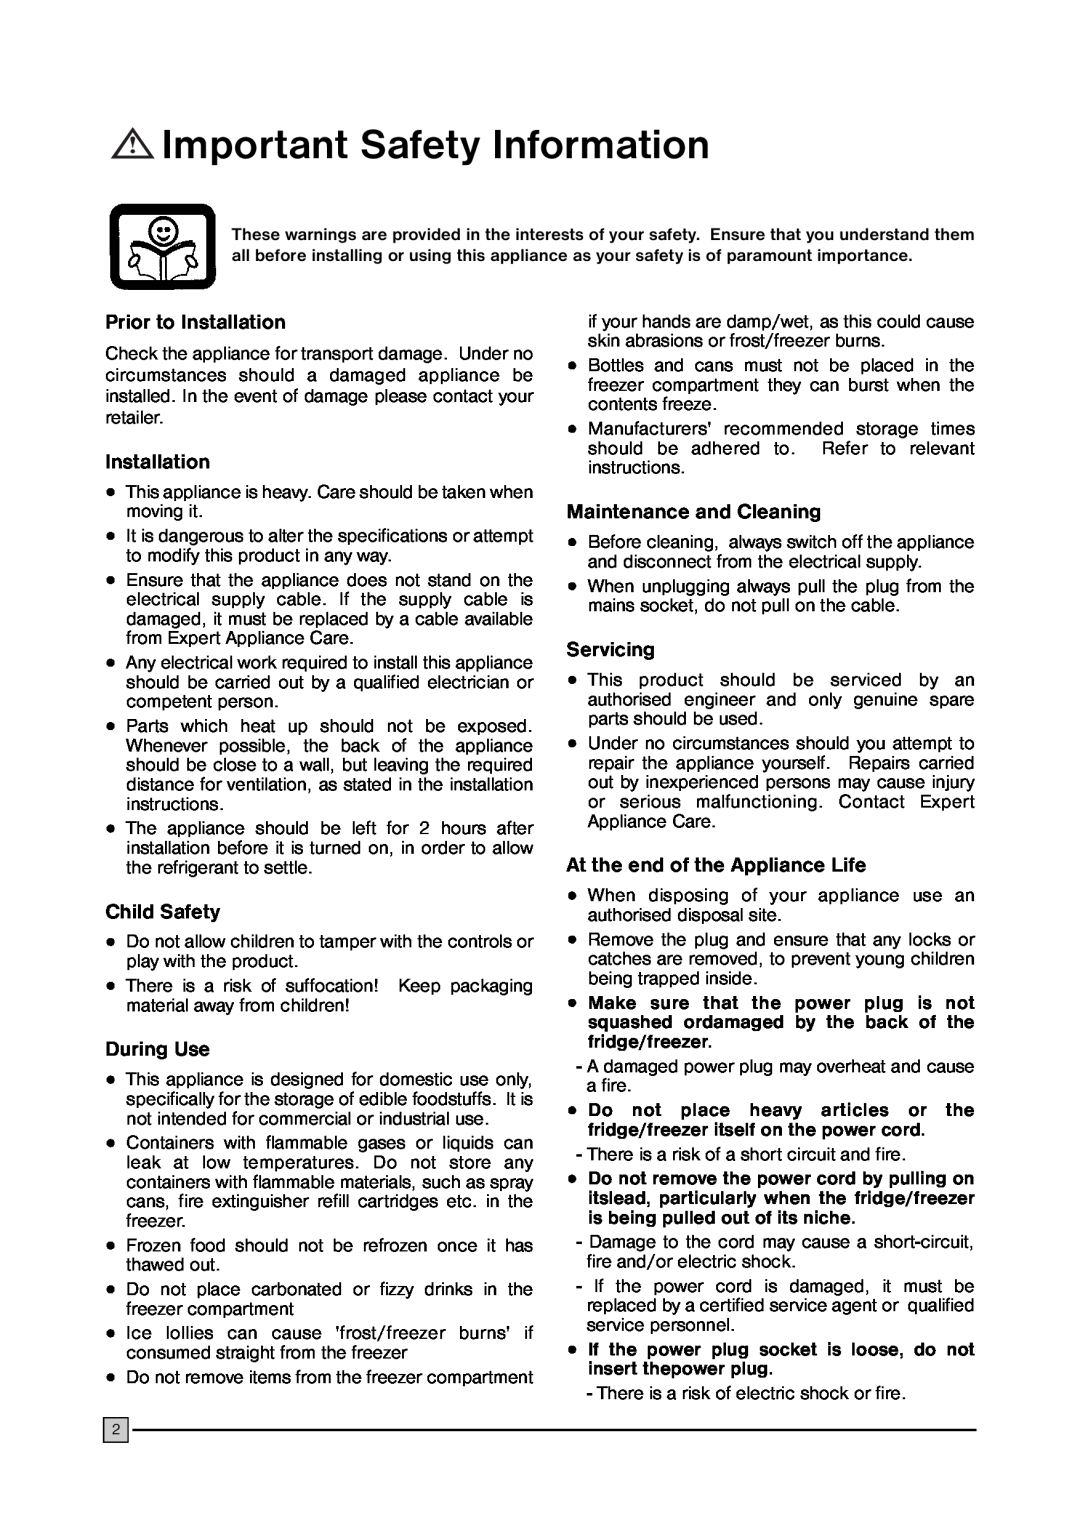 Electrolux ECN 2757 manual Important Safety Information, Prior to Installation, Child Safety, During Use, Servicing 